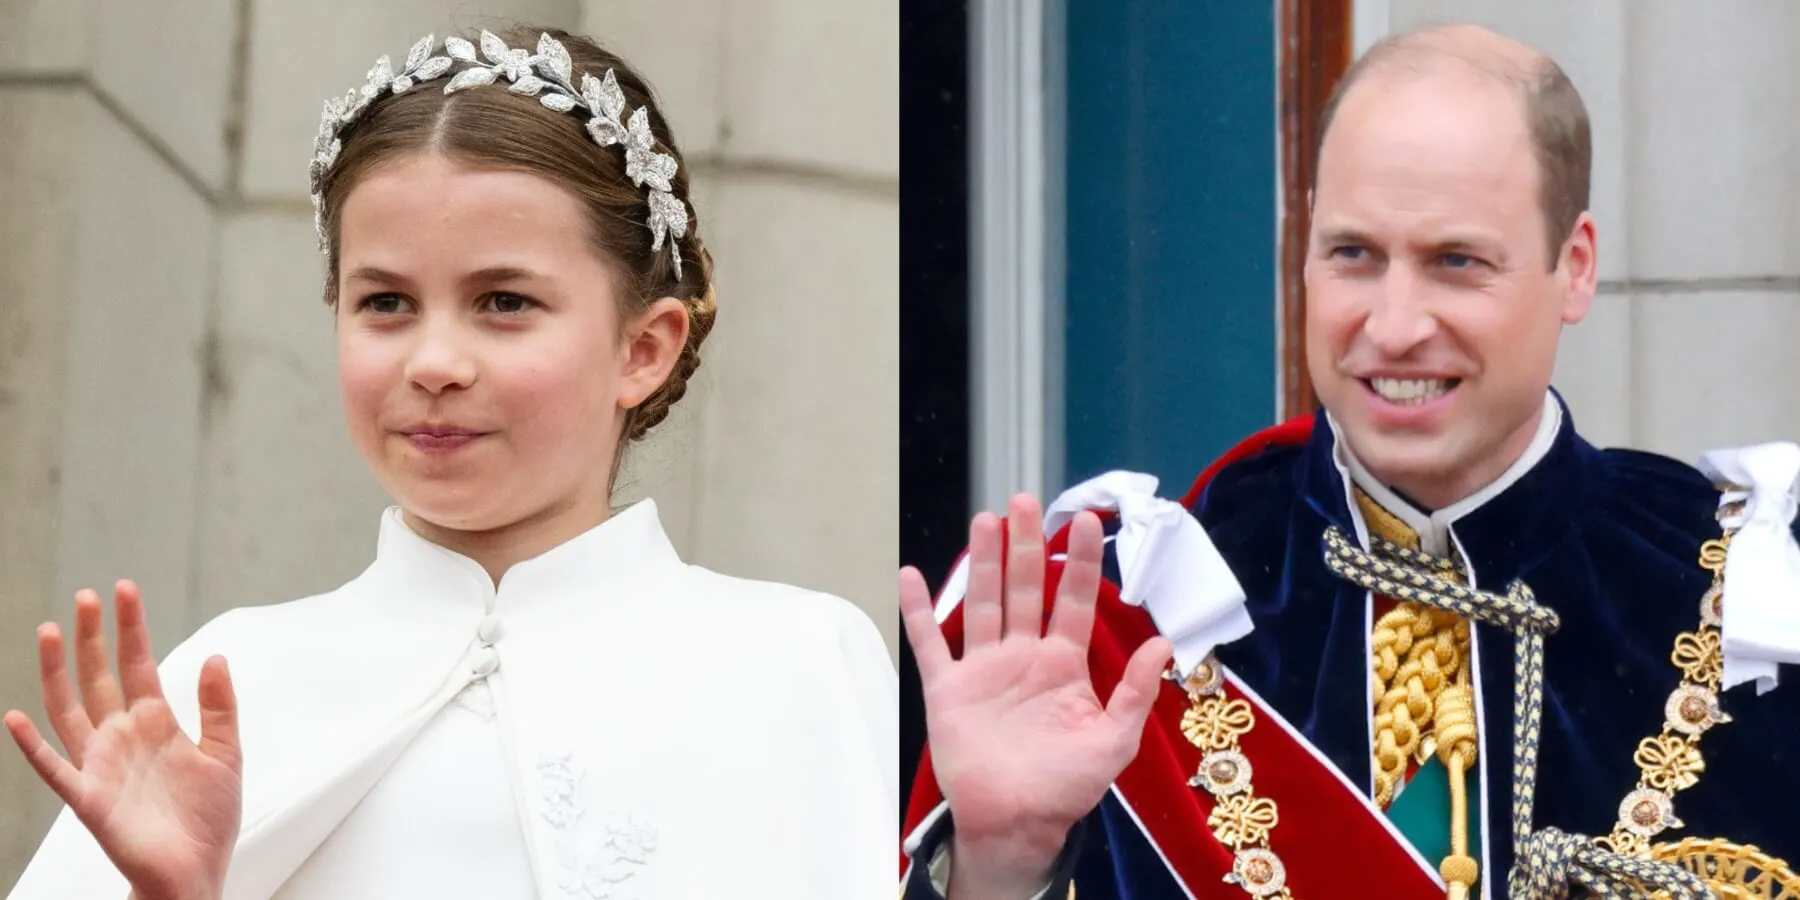 Princess Charlotte and Prince William in side-by-side photographs